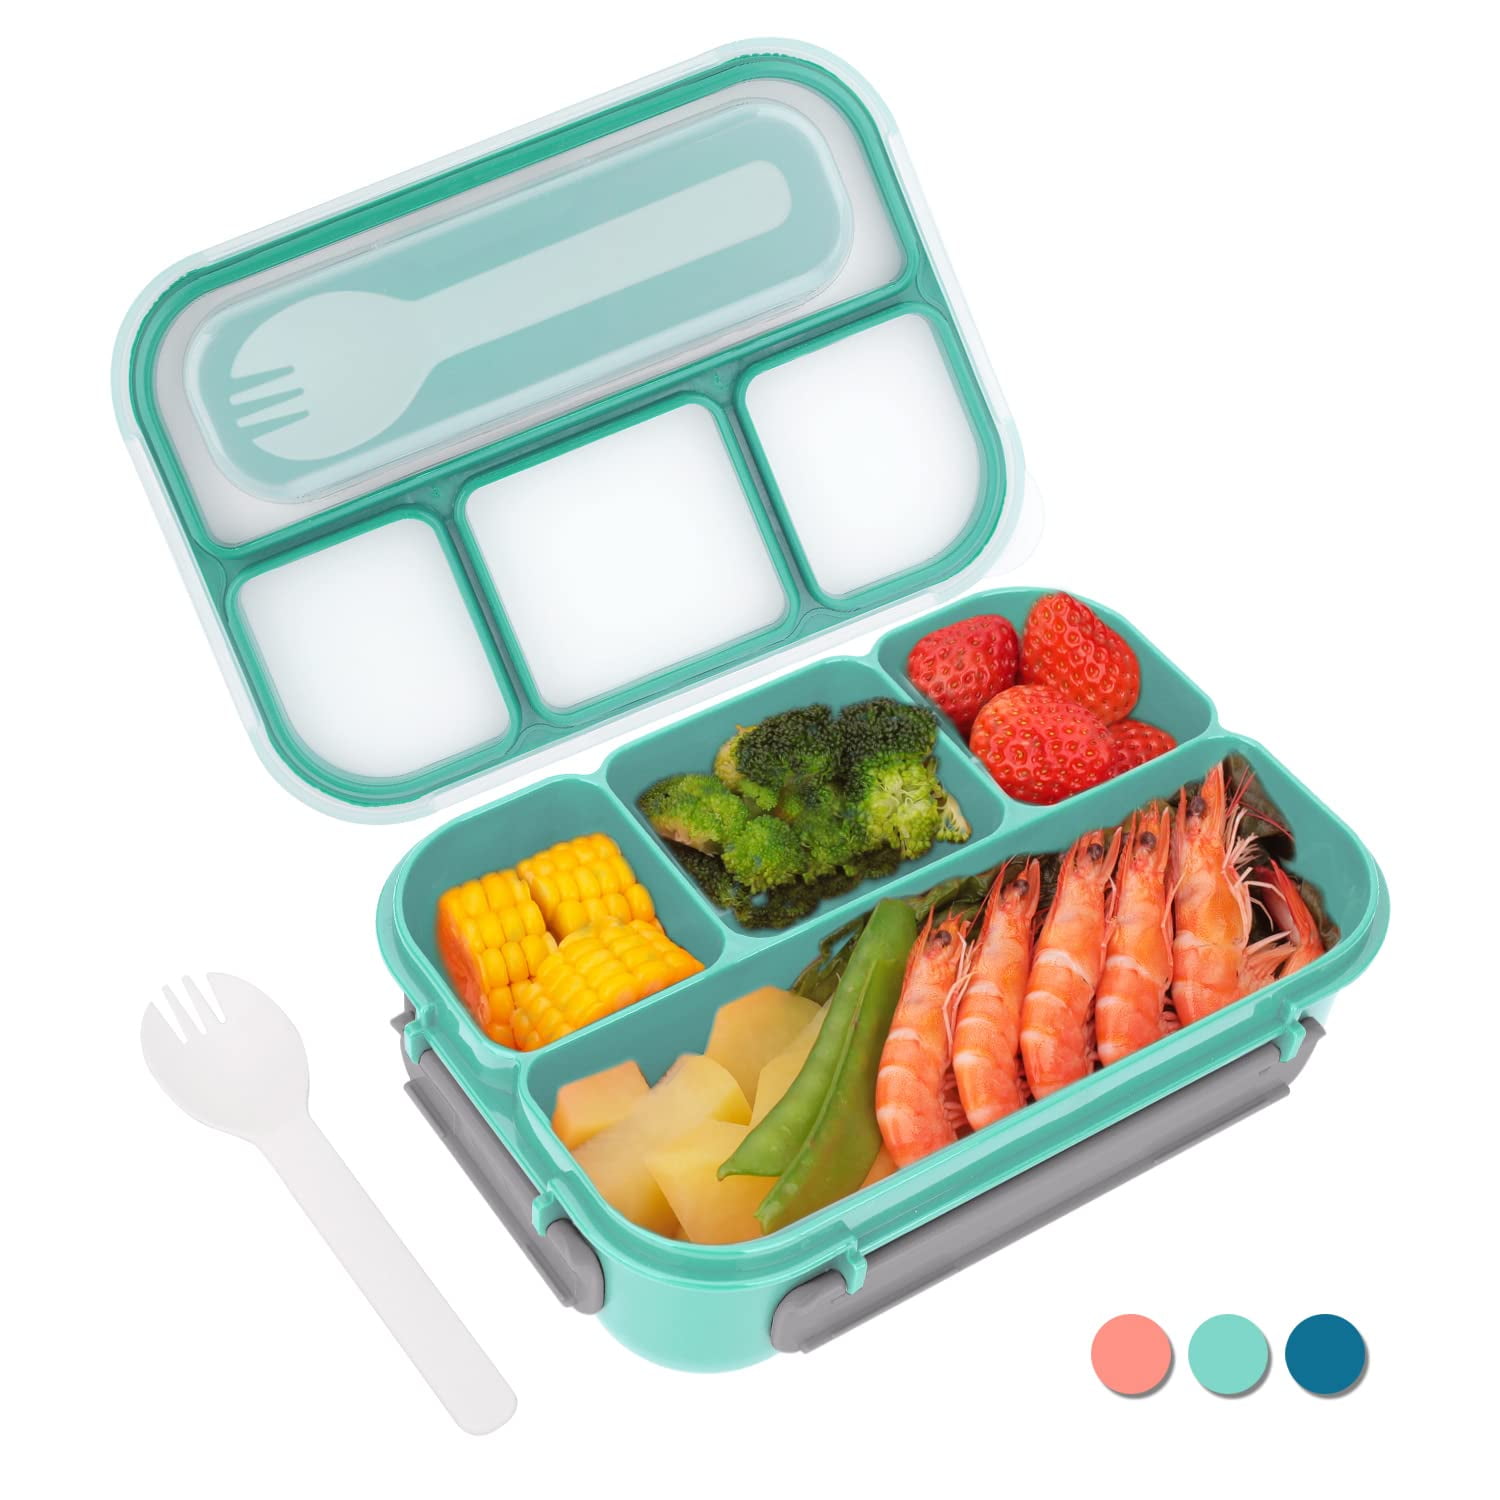 Amathley Bento box lunch box,lunch containers for Adults/Kids/Toddler,5  Compartments bento Lunch box…See more Amathley Bento box lunch box,lunch